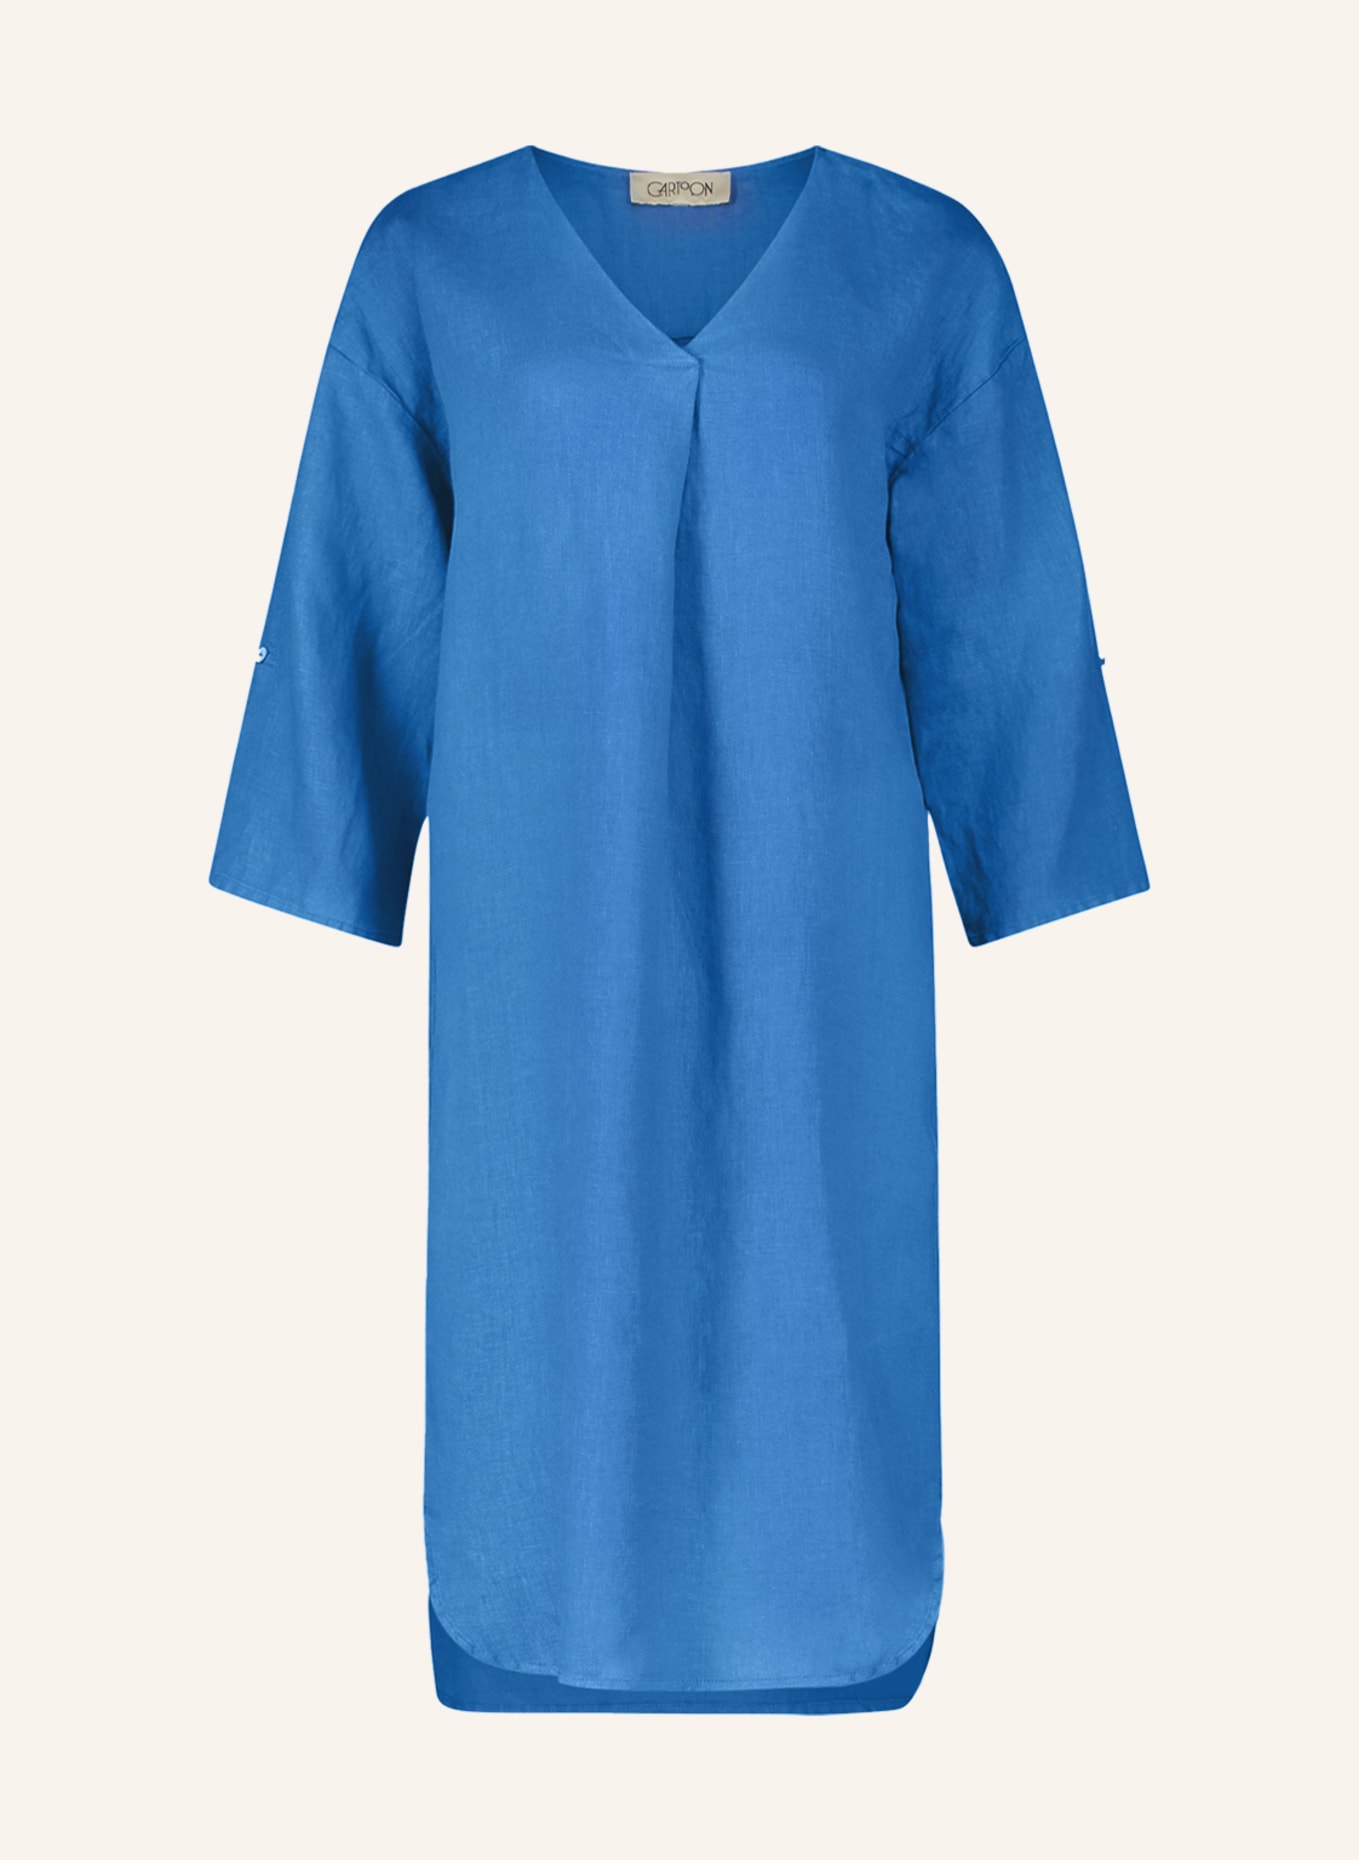 CARTOON Linen dress with 3/4 sleeves, Color: TURQUOISE (Image 1)